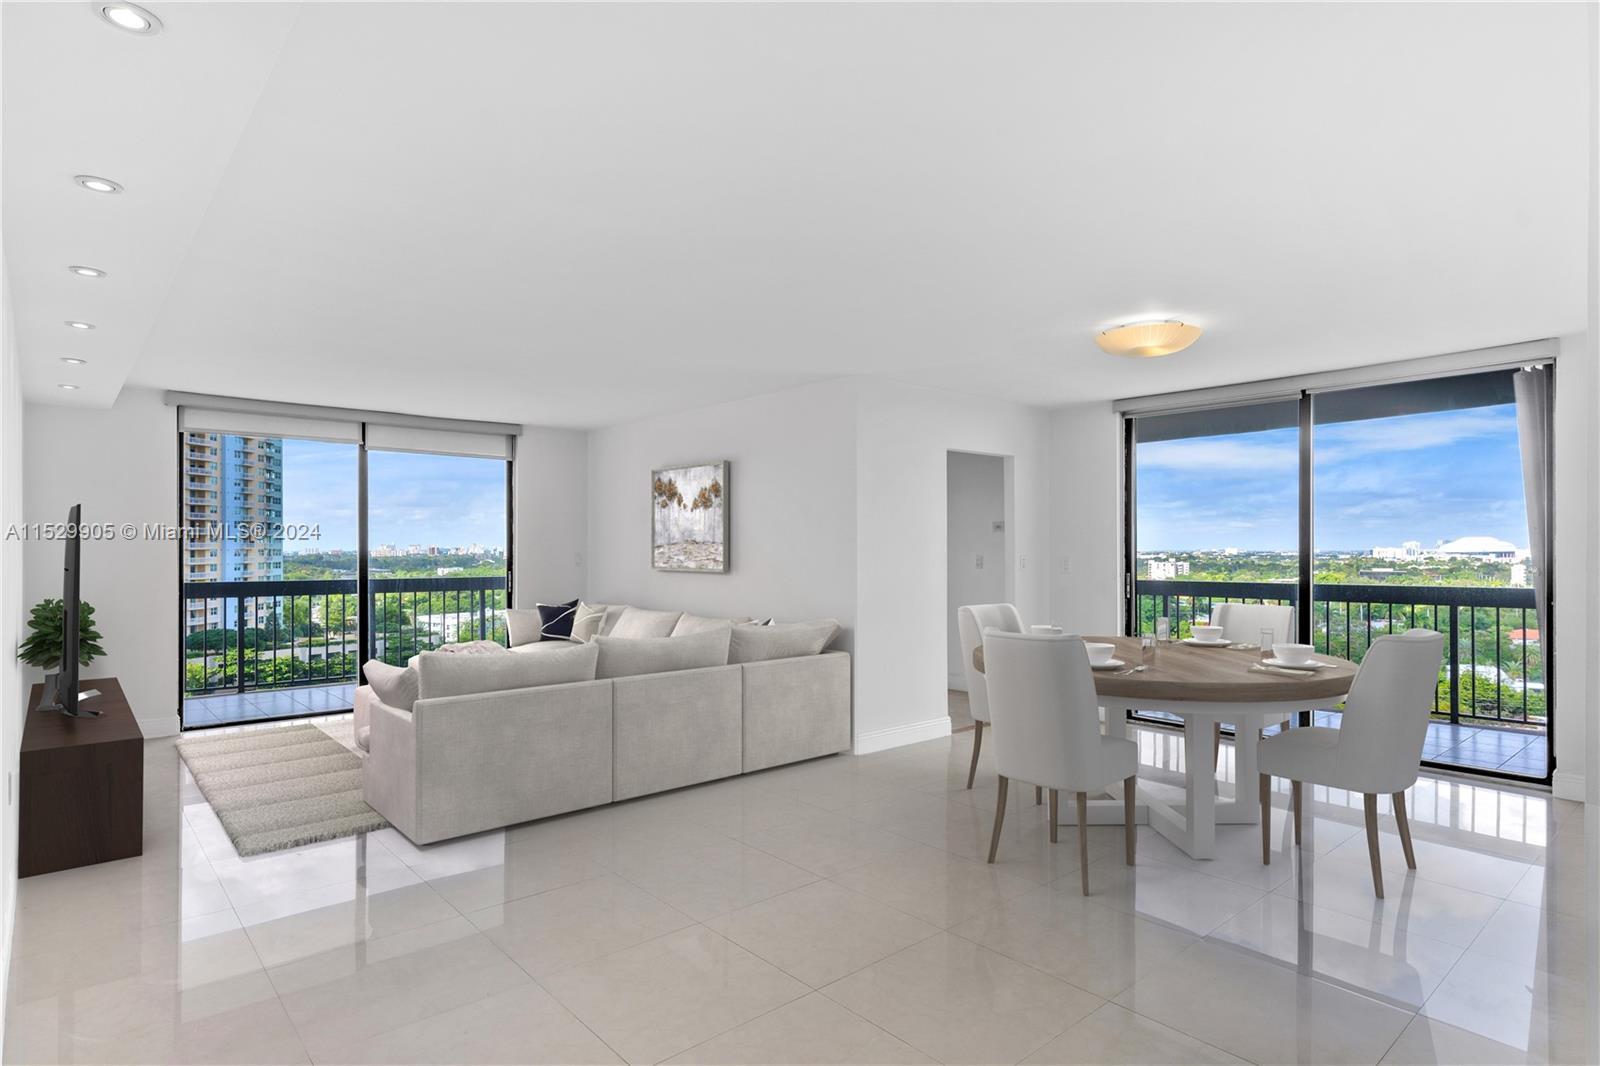 Beautiful 2 bed 2 bath Brickell waterfront condo with wrap-around balcony and amazing panoramic view